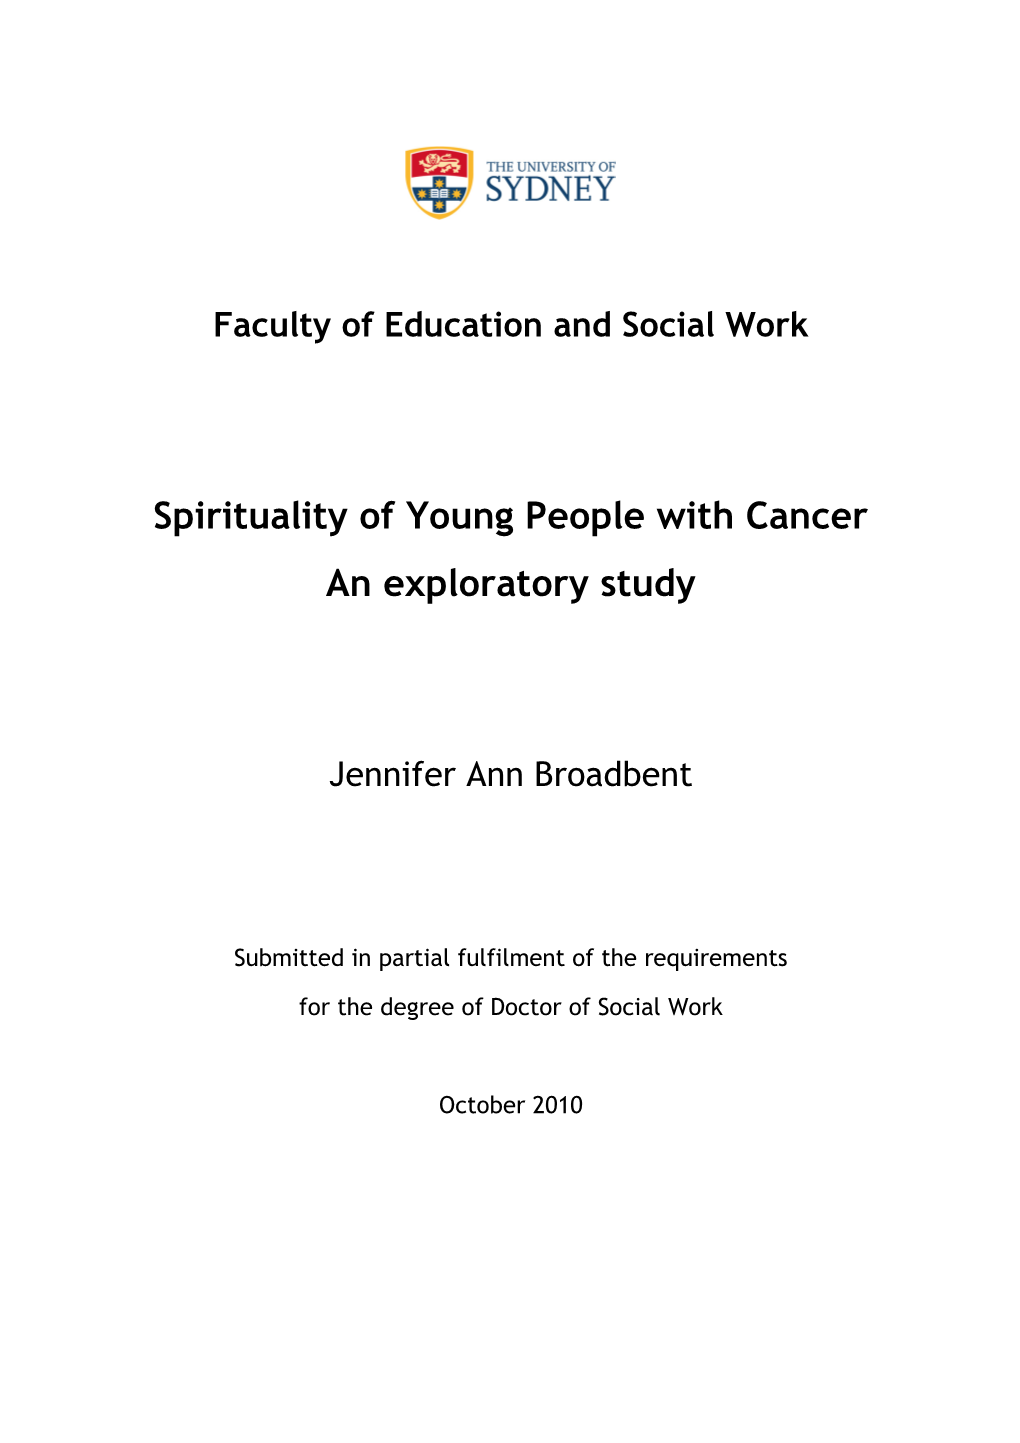 Spirituality of Young People with Cancer an Exploratory Study